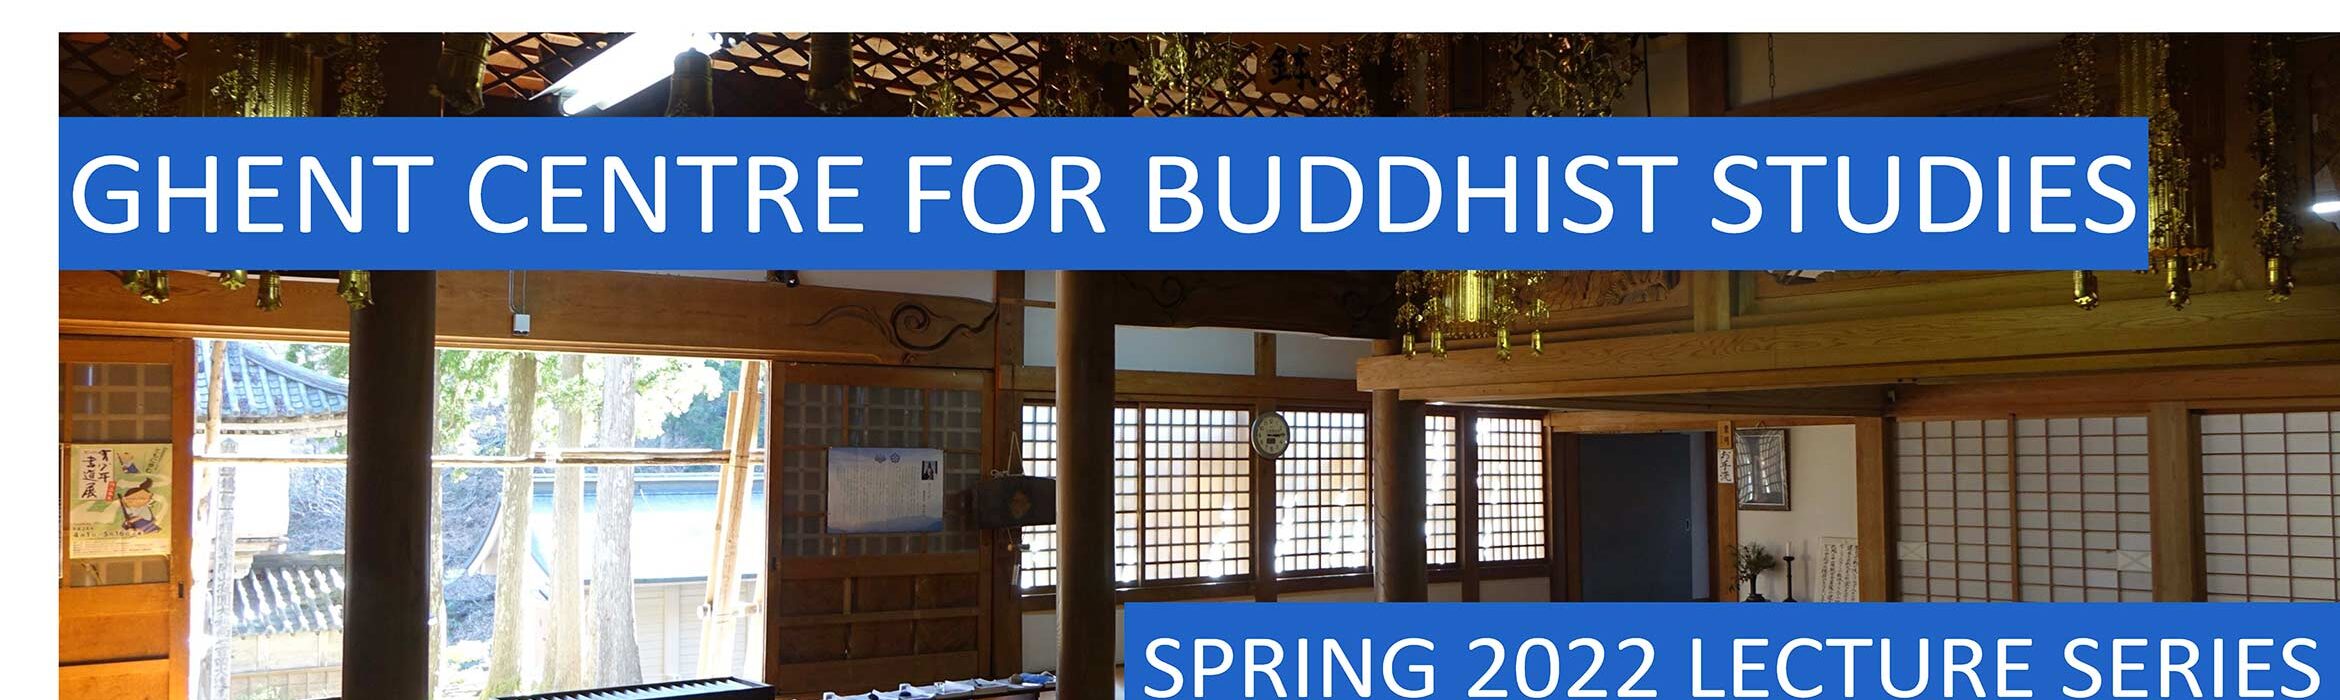 Lecture Series 2022: Permanent Training in Buddhist Studies (PTBS)